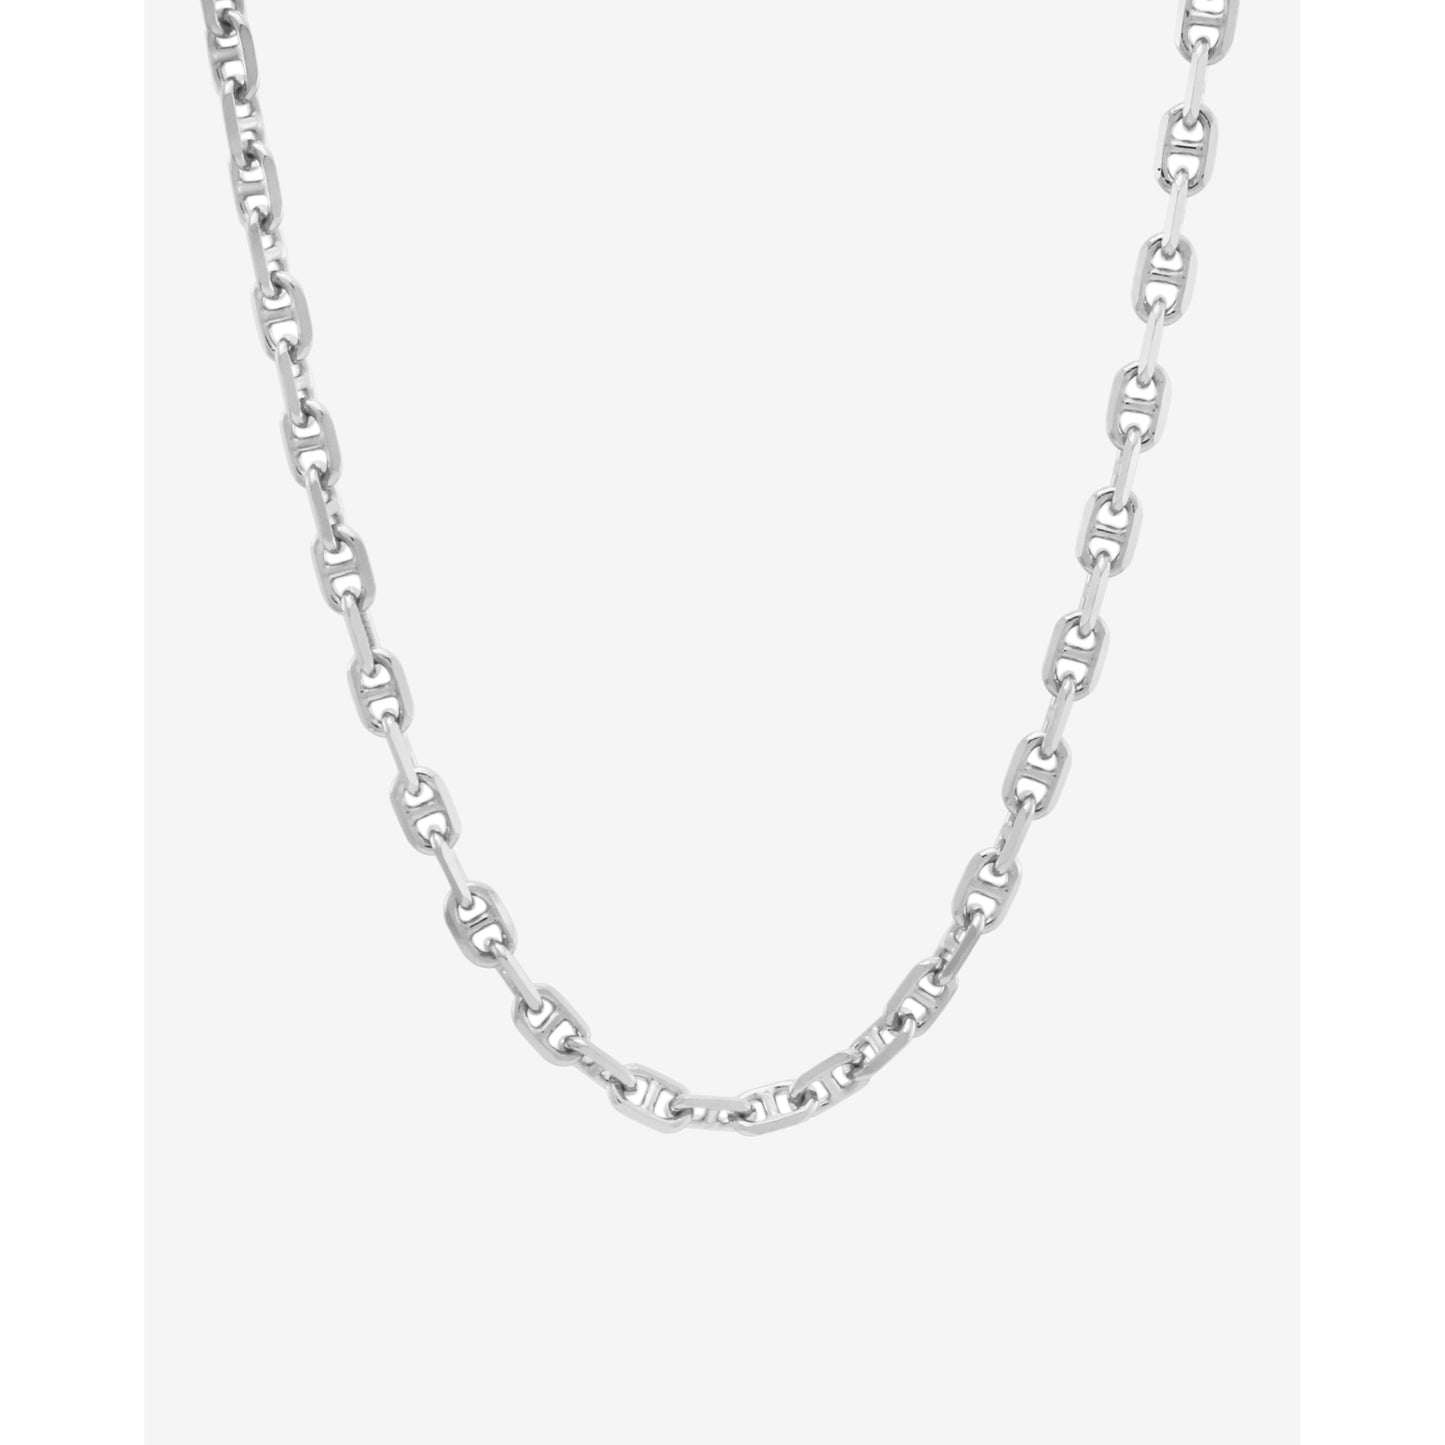 45cm Chunky Anchor Chain Necklace in Silver